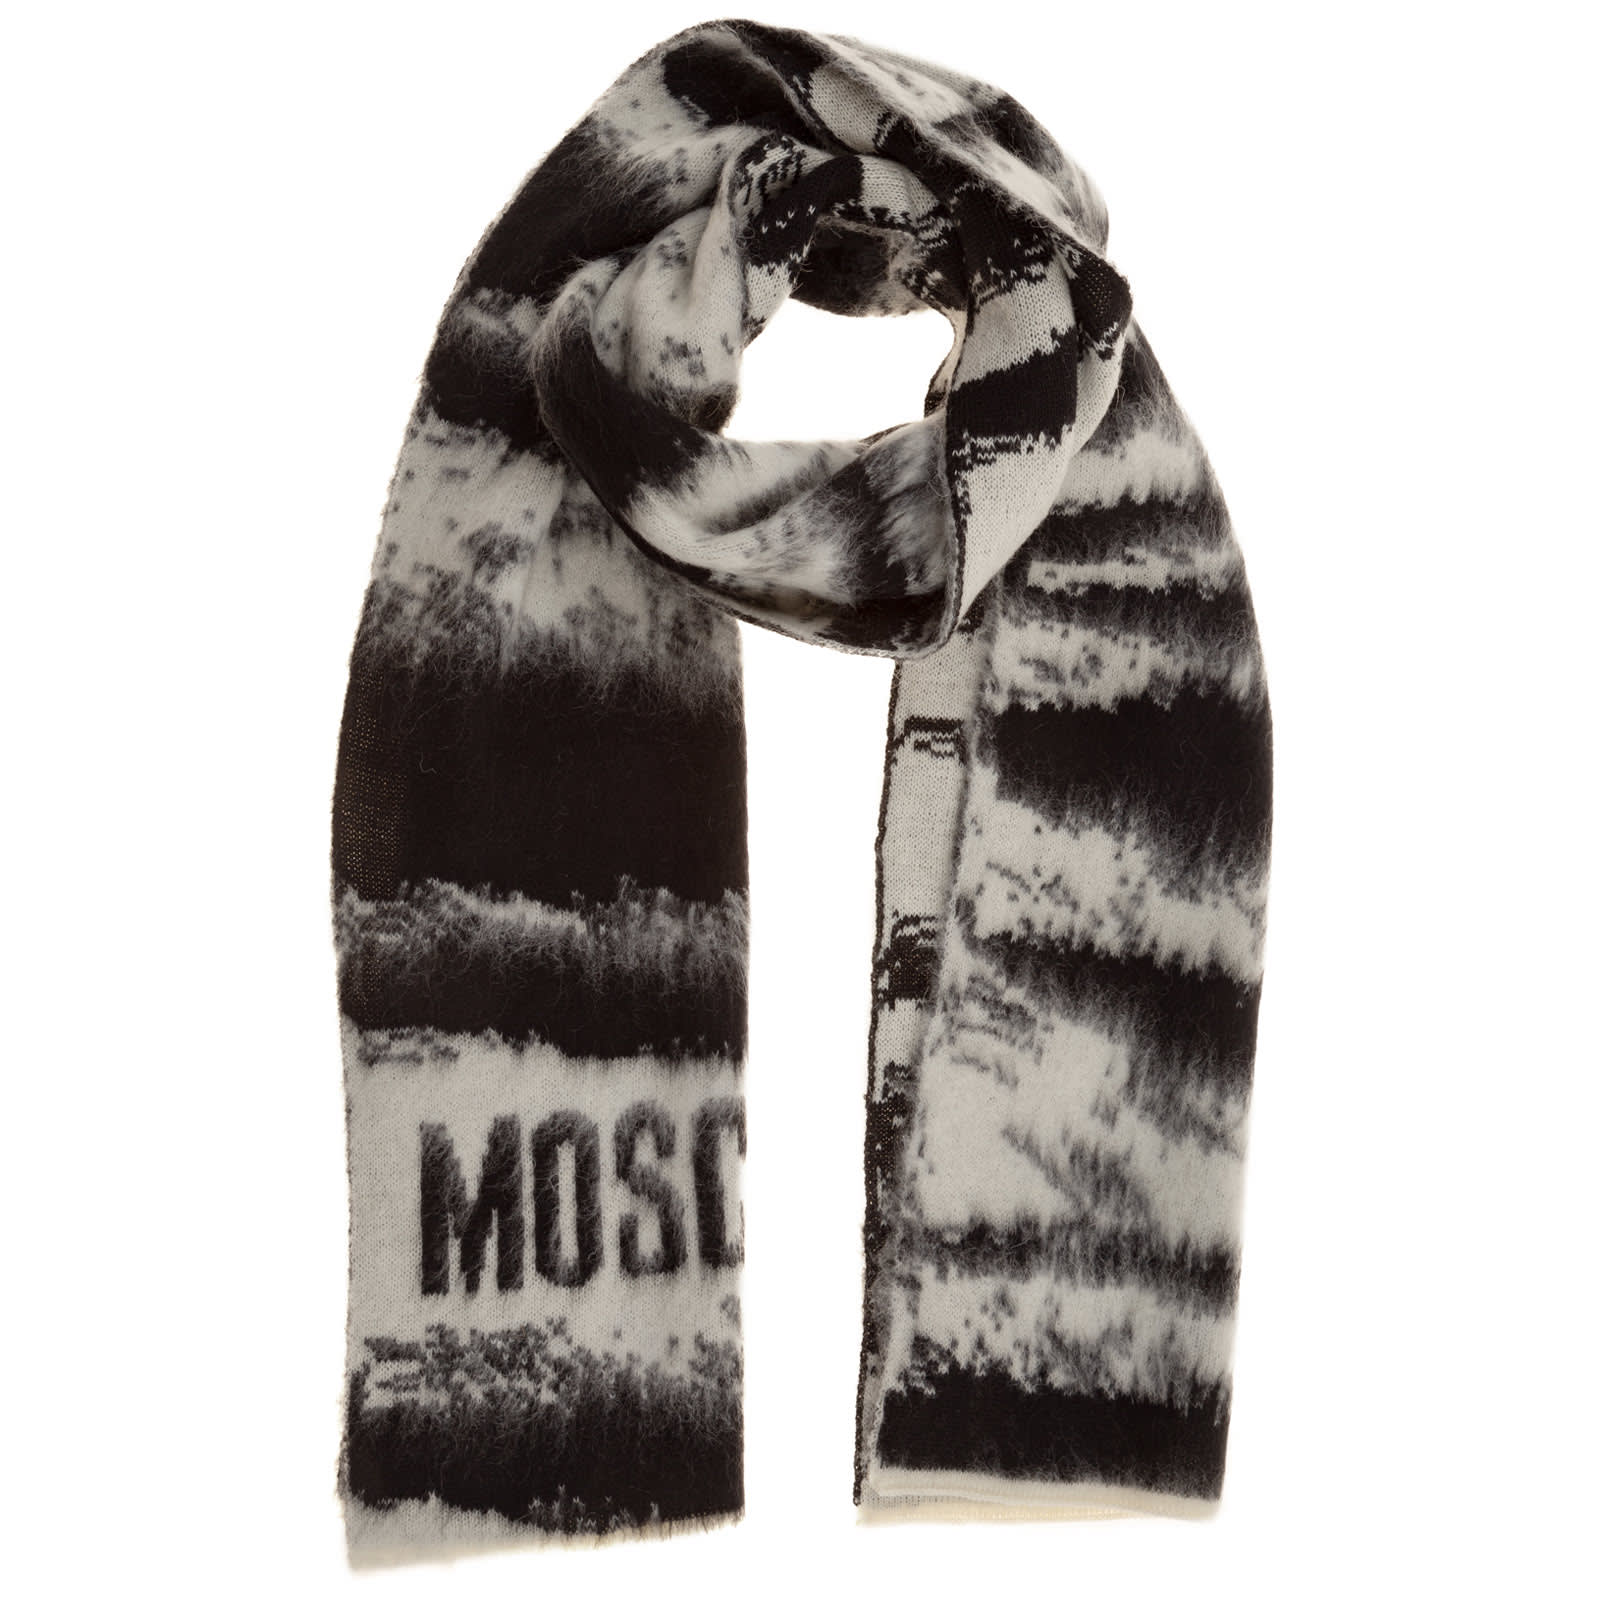 MOSCHINO DOUBLE QUESTION MARK SCARF,M235930636002